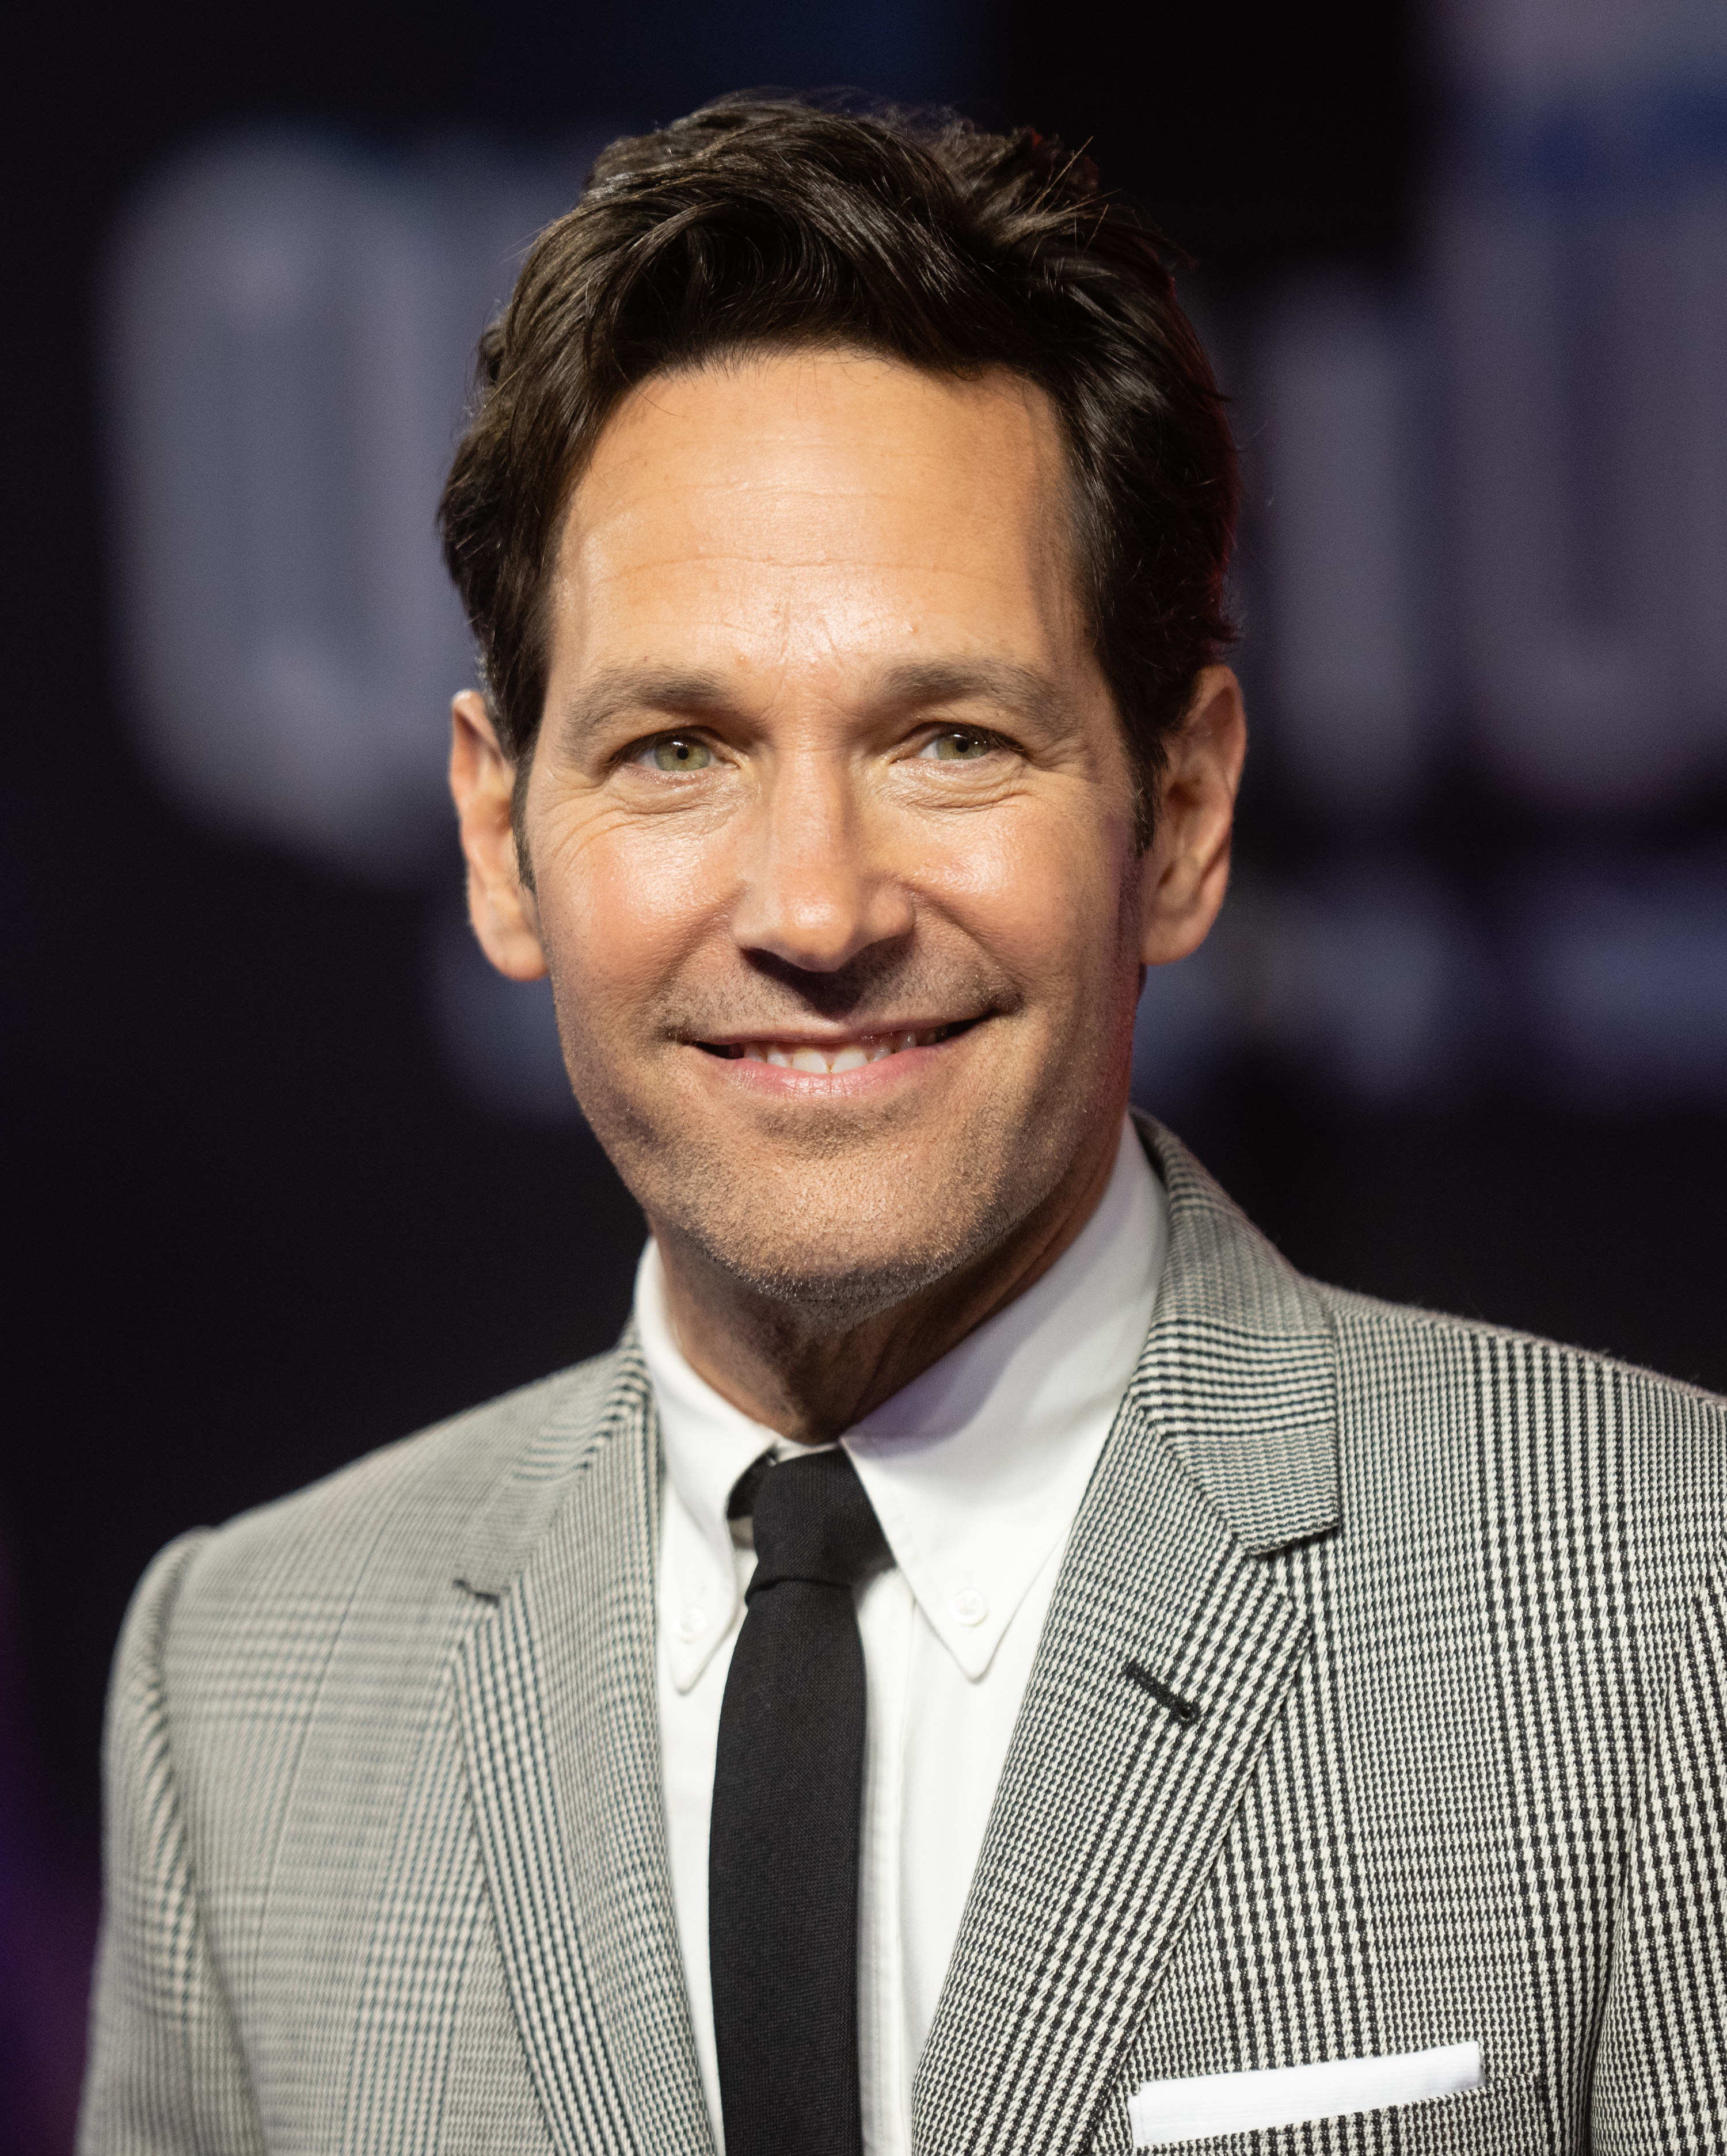 Paul Rudd at the premiere of "Ant-Man and the Wasp: Quantumania